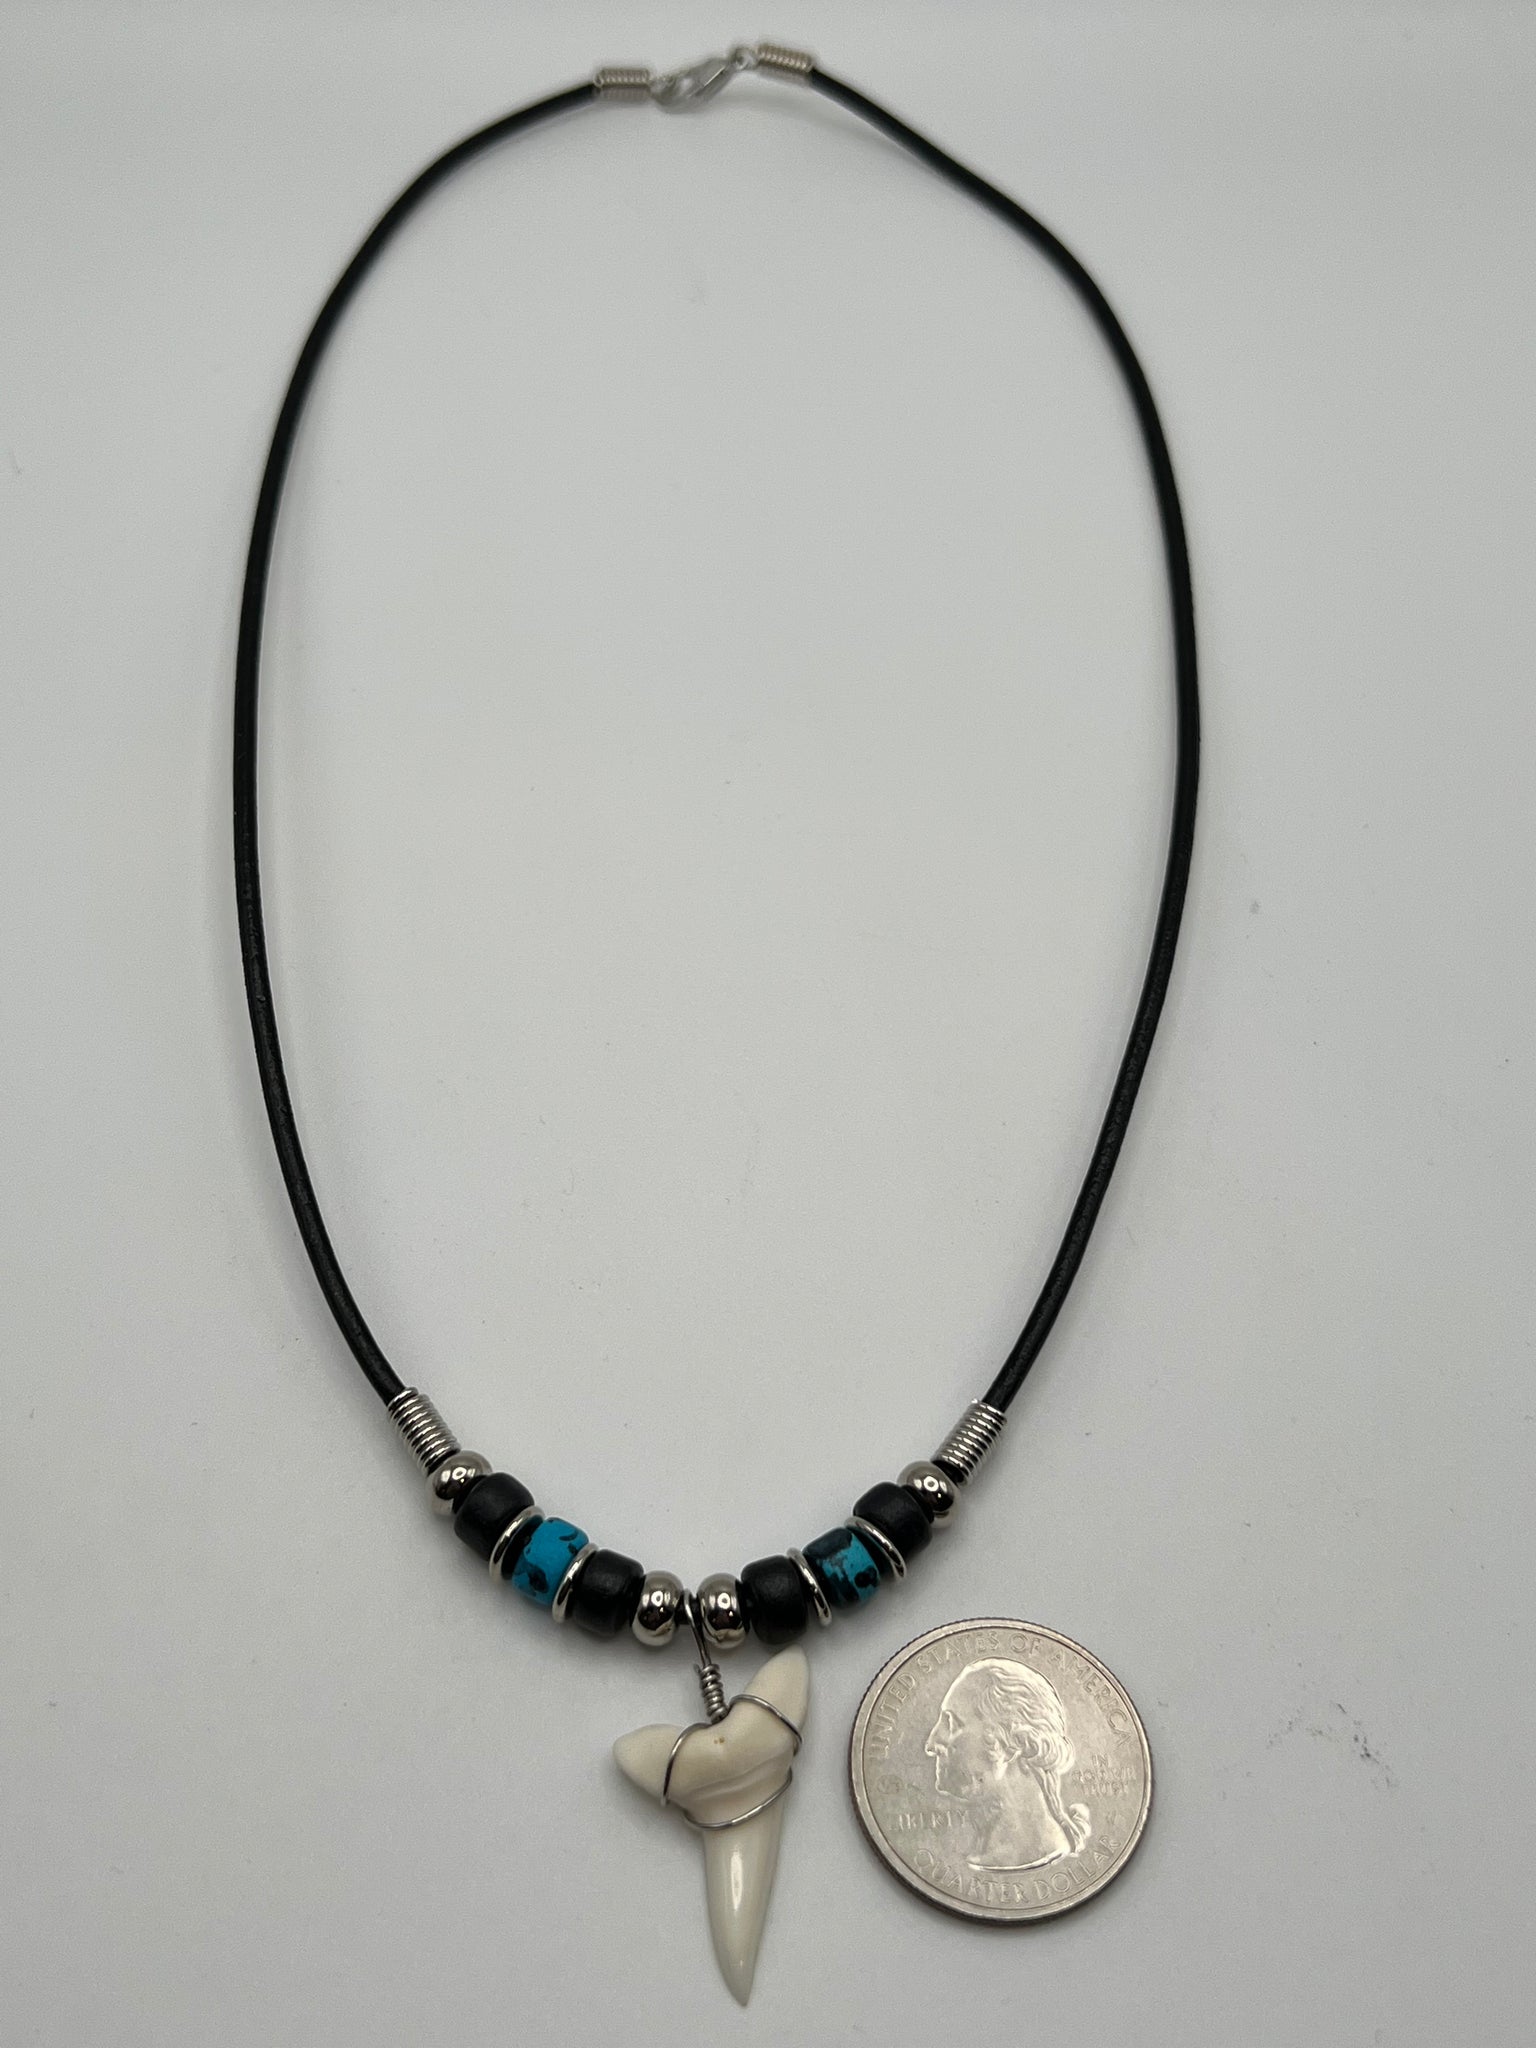 White Mako Shark Tooth Necklace Blue and Black Speckled Beads – Real ...